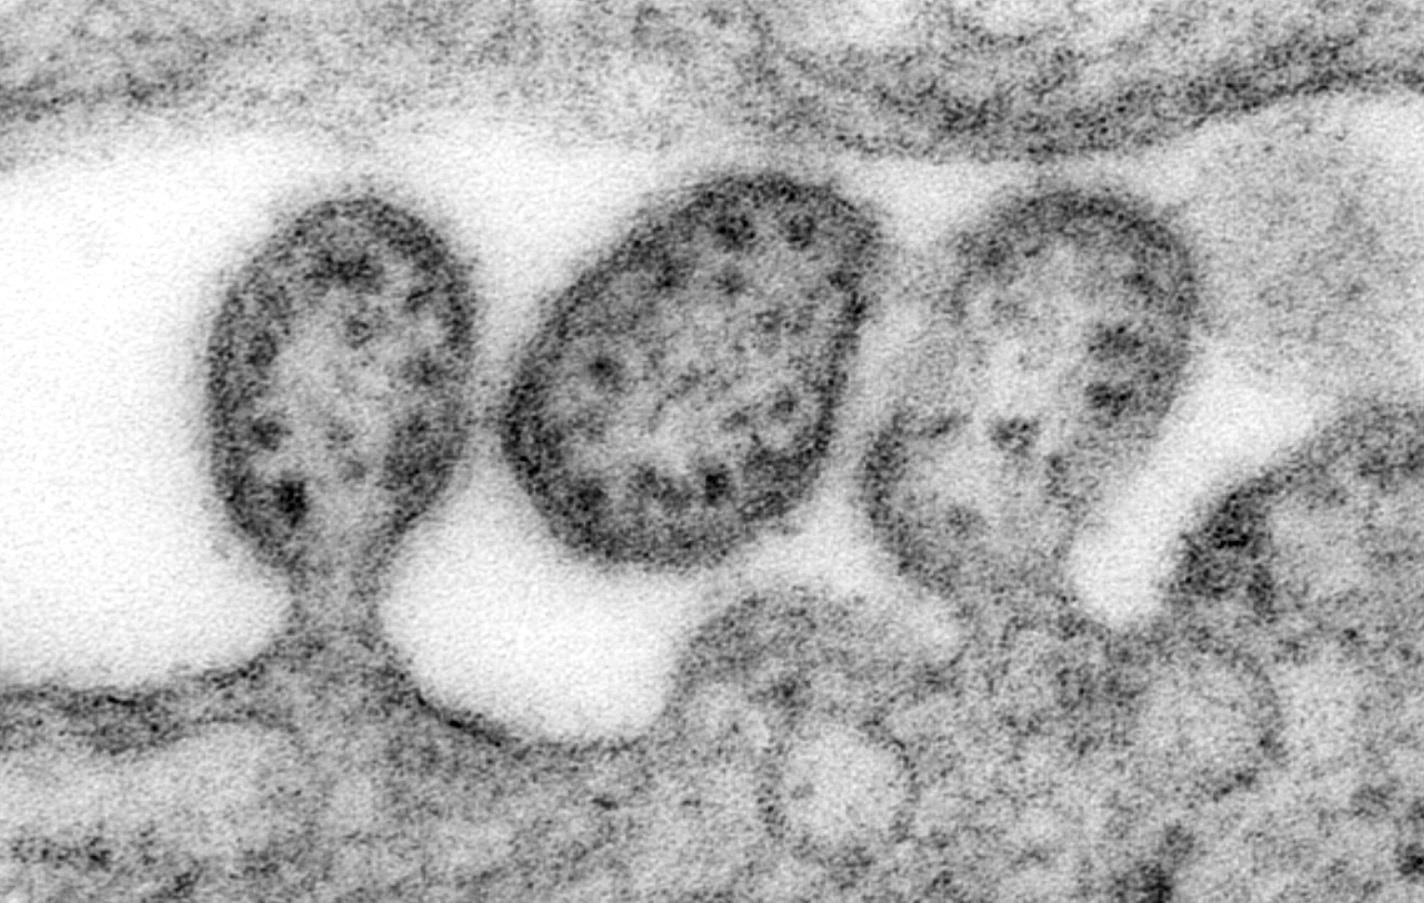 New Research May Help Stop Deadly Lassa Virus